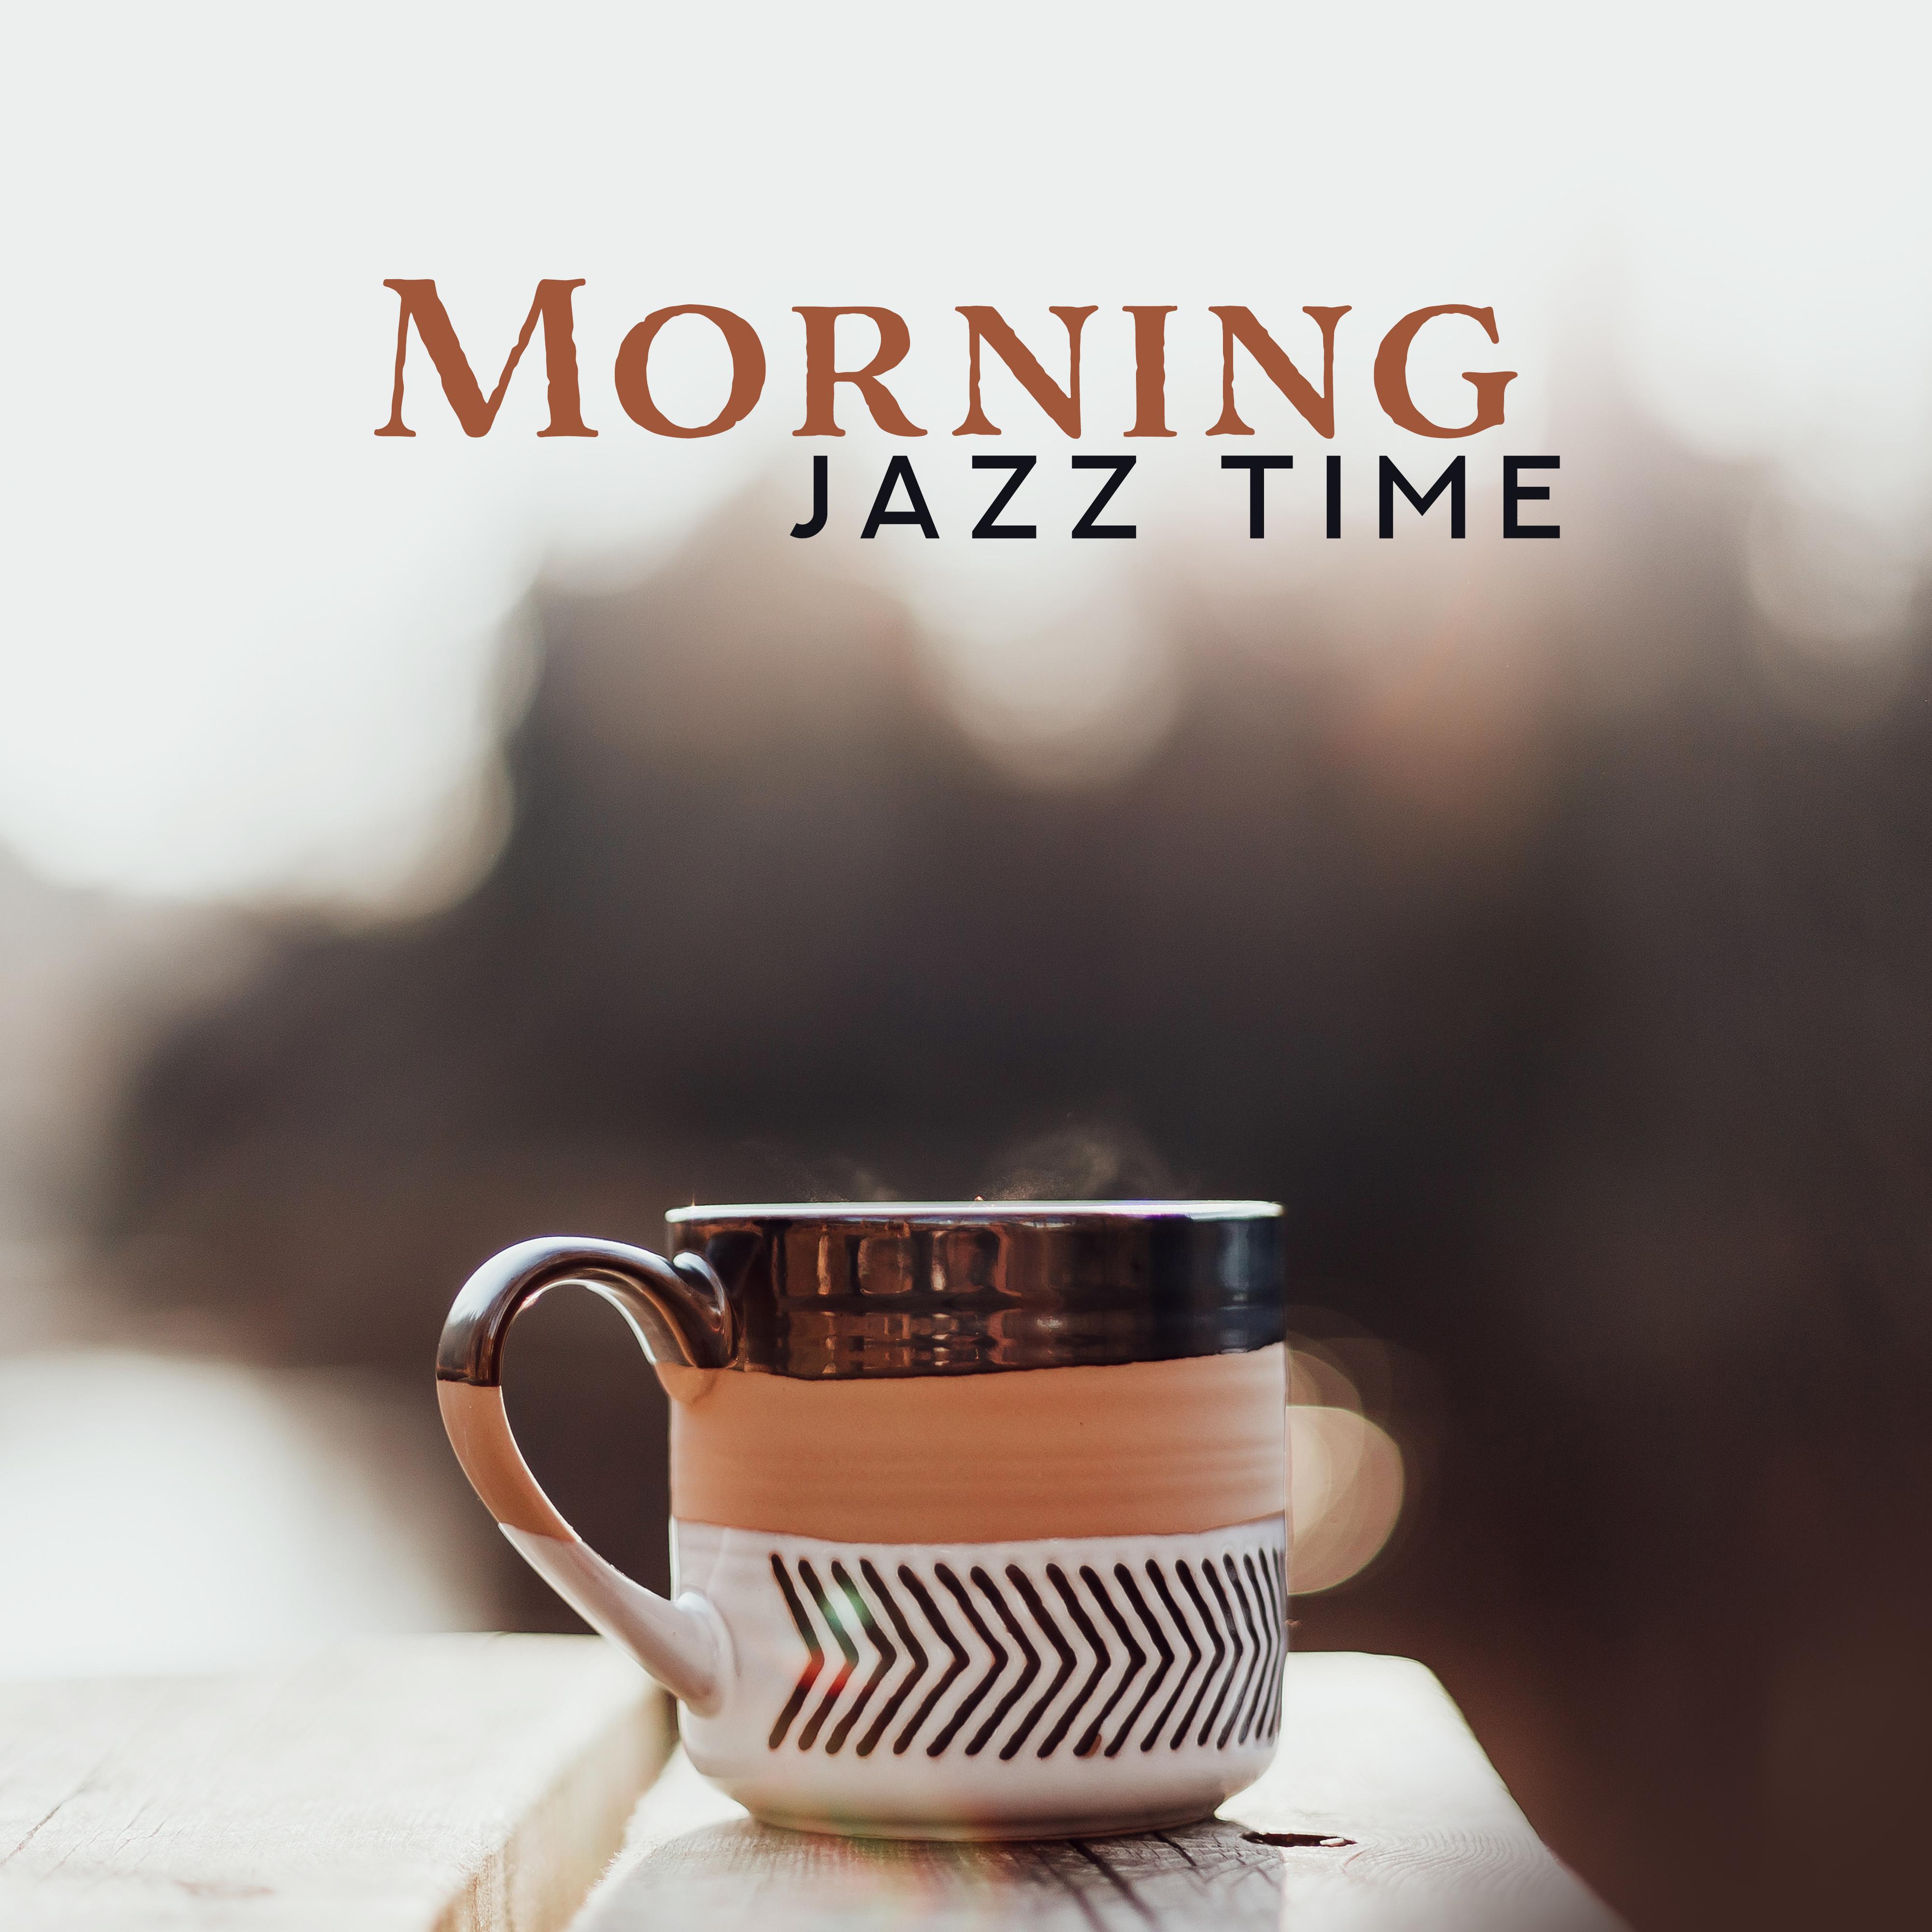 Morning Jazz Time: 2019 Instrumental Smooth Jazz for Good Start a Day, Positive Energy Shot for All Day, Enjoy the Breakfast with Your Love or Friends, Soft Sounds of Piano, Guitar, Trumpet & More